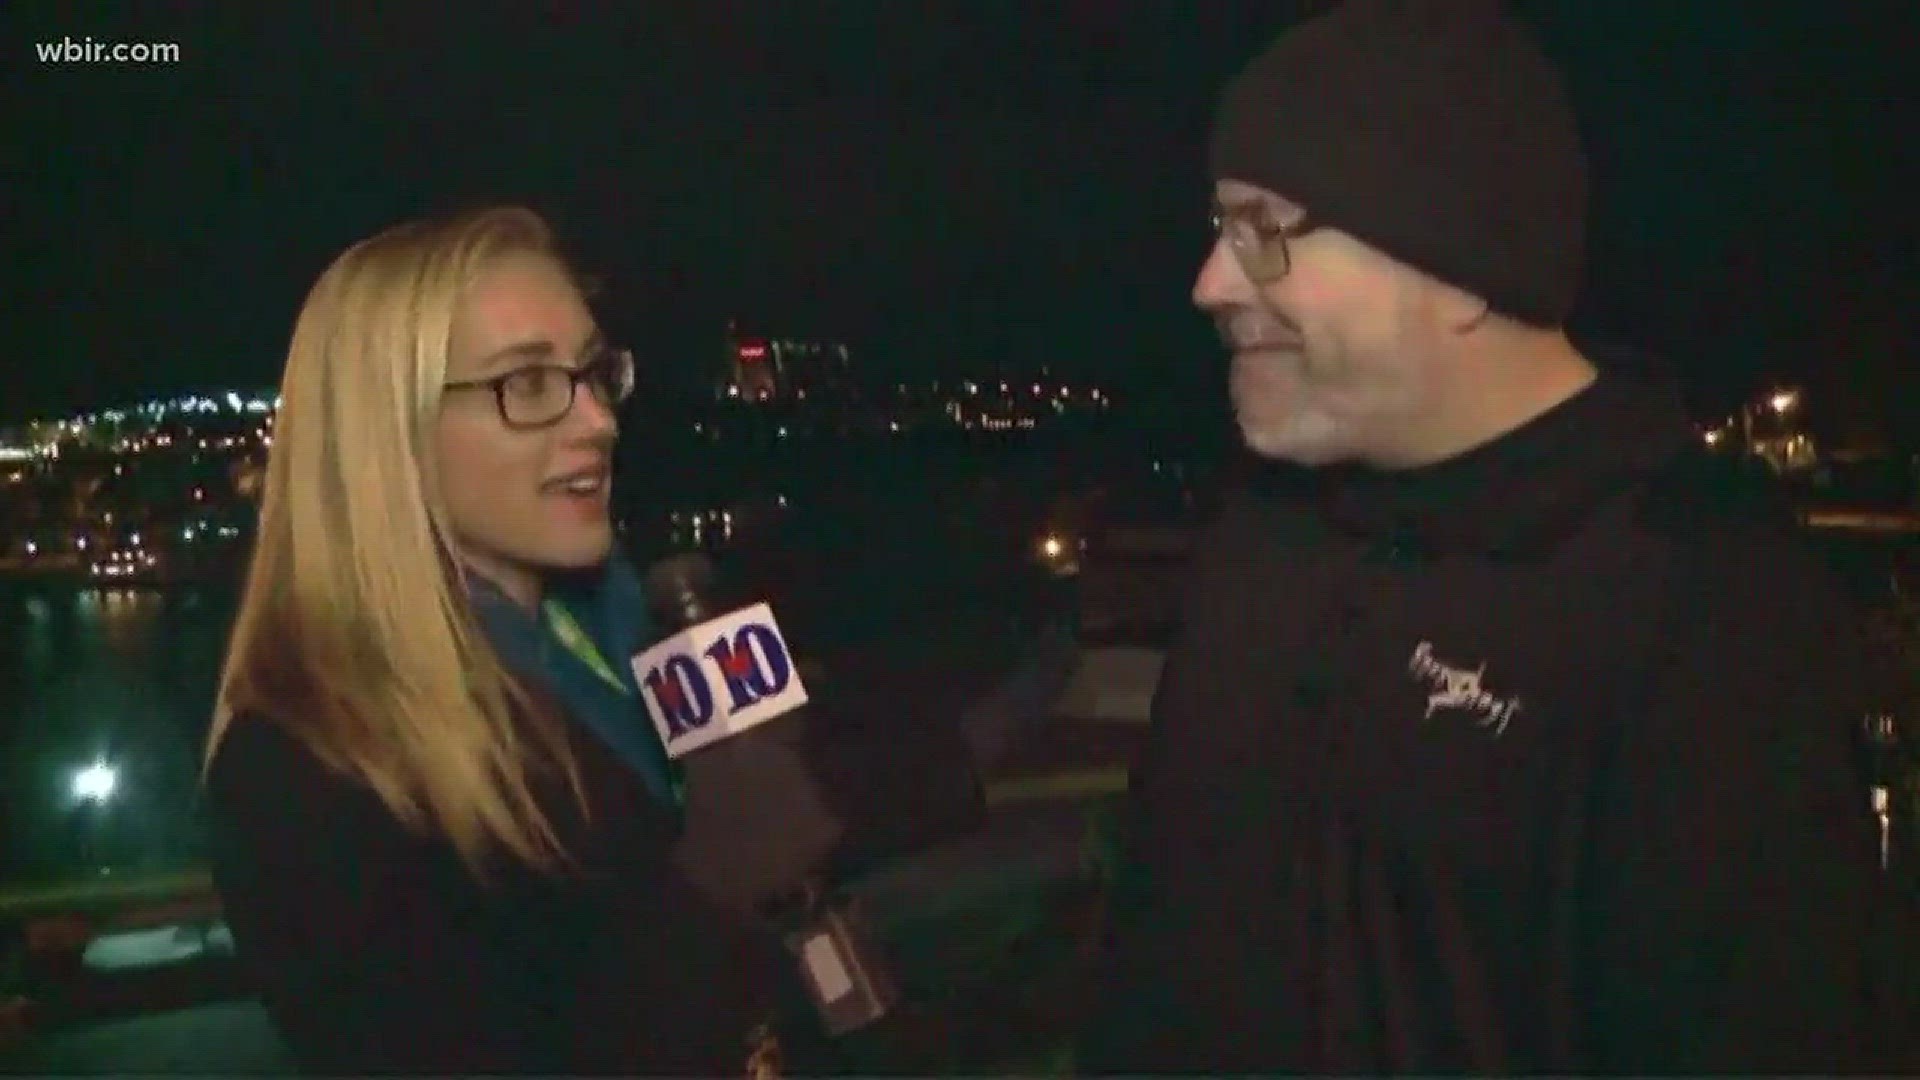 Famed paranormal investigator J-Adam Smith takes WBIR10news Reporter Leslie Ackerson on a haunted excursion around Knoxville.